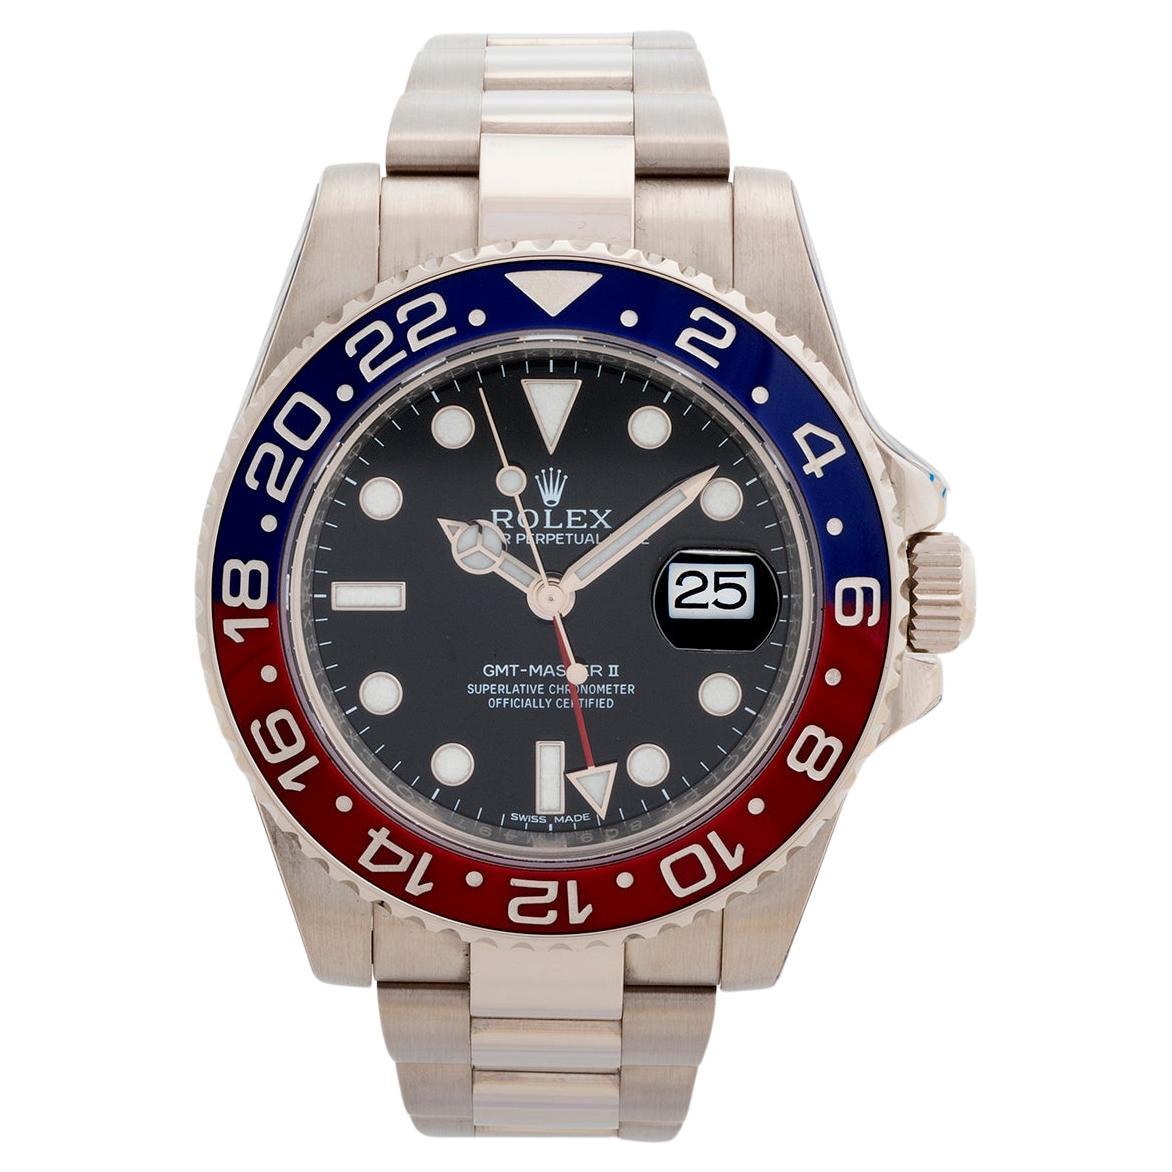 Rolex GMT Master II Wristwatch. 18ct White Gold. Discontinued Reference. Yr 2015 For Sale